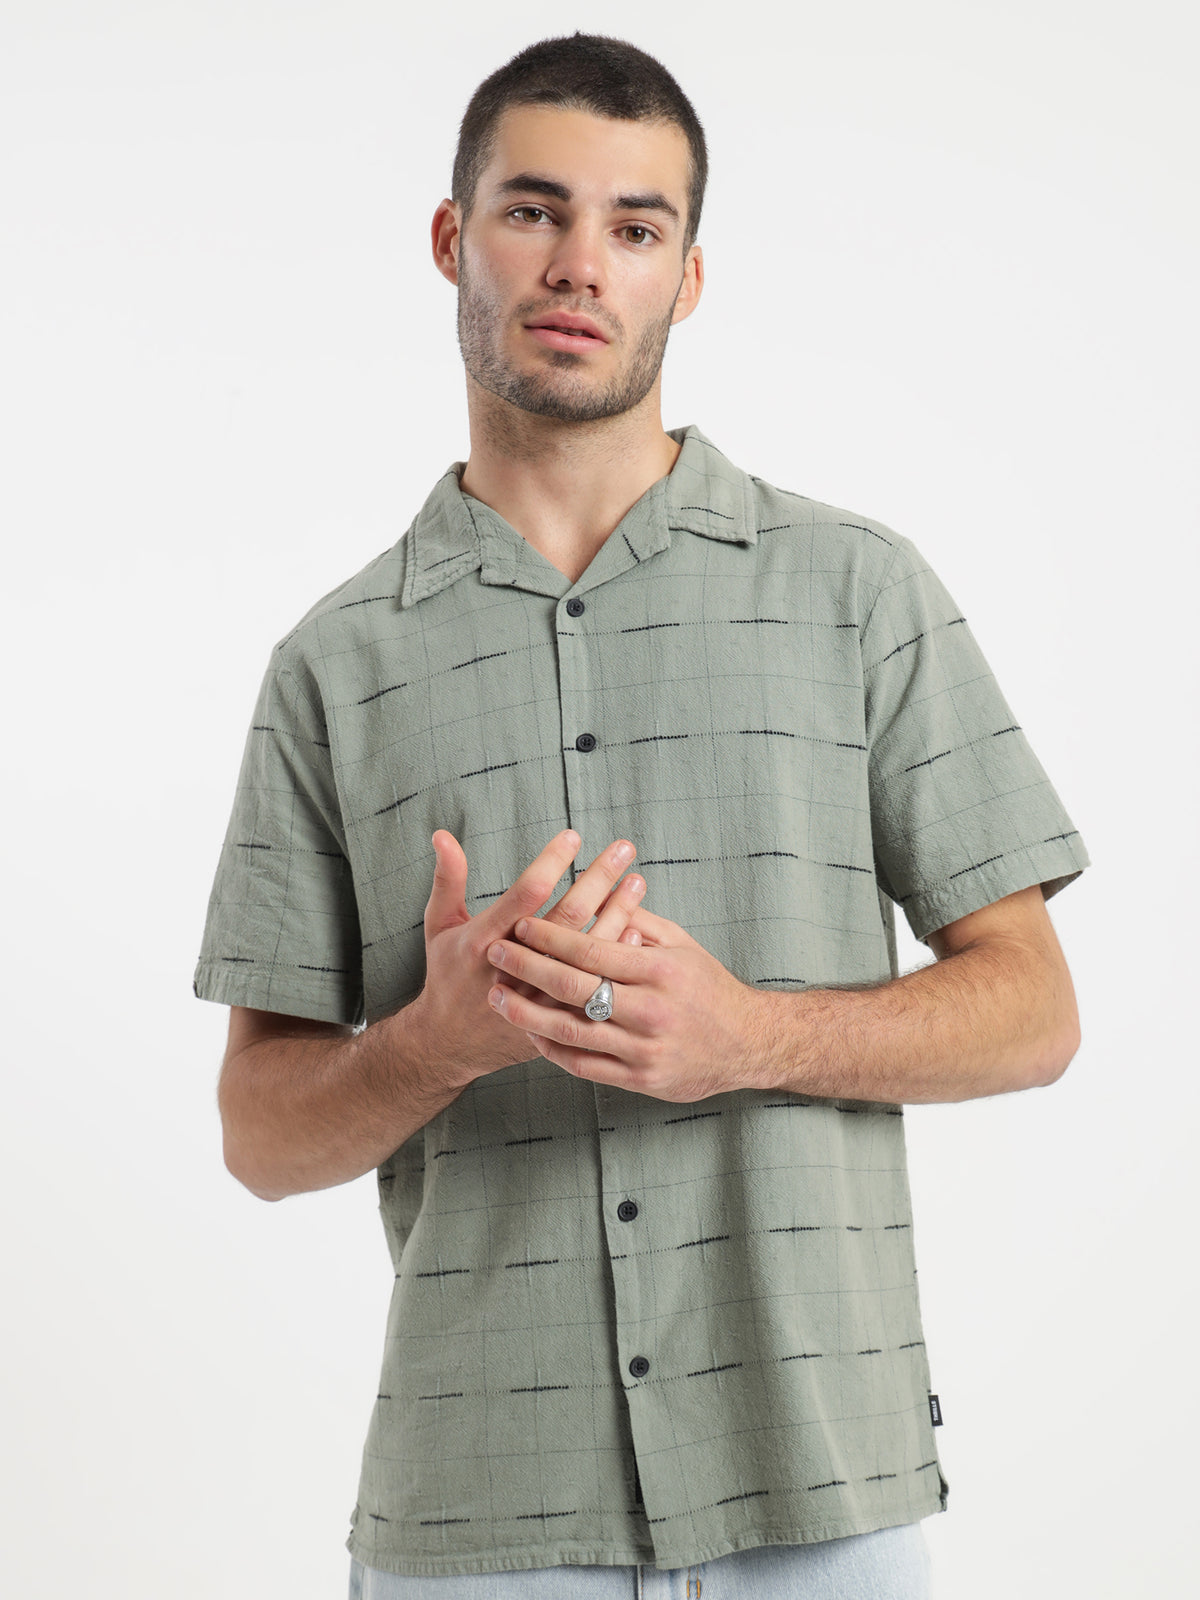 Enlightenment Bowling Shirt in Sea Glass